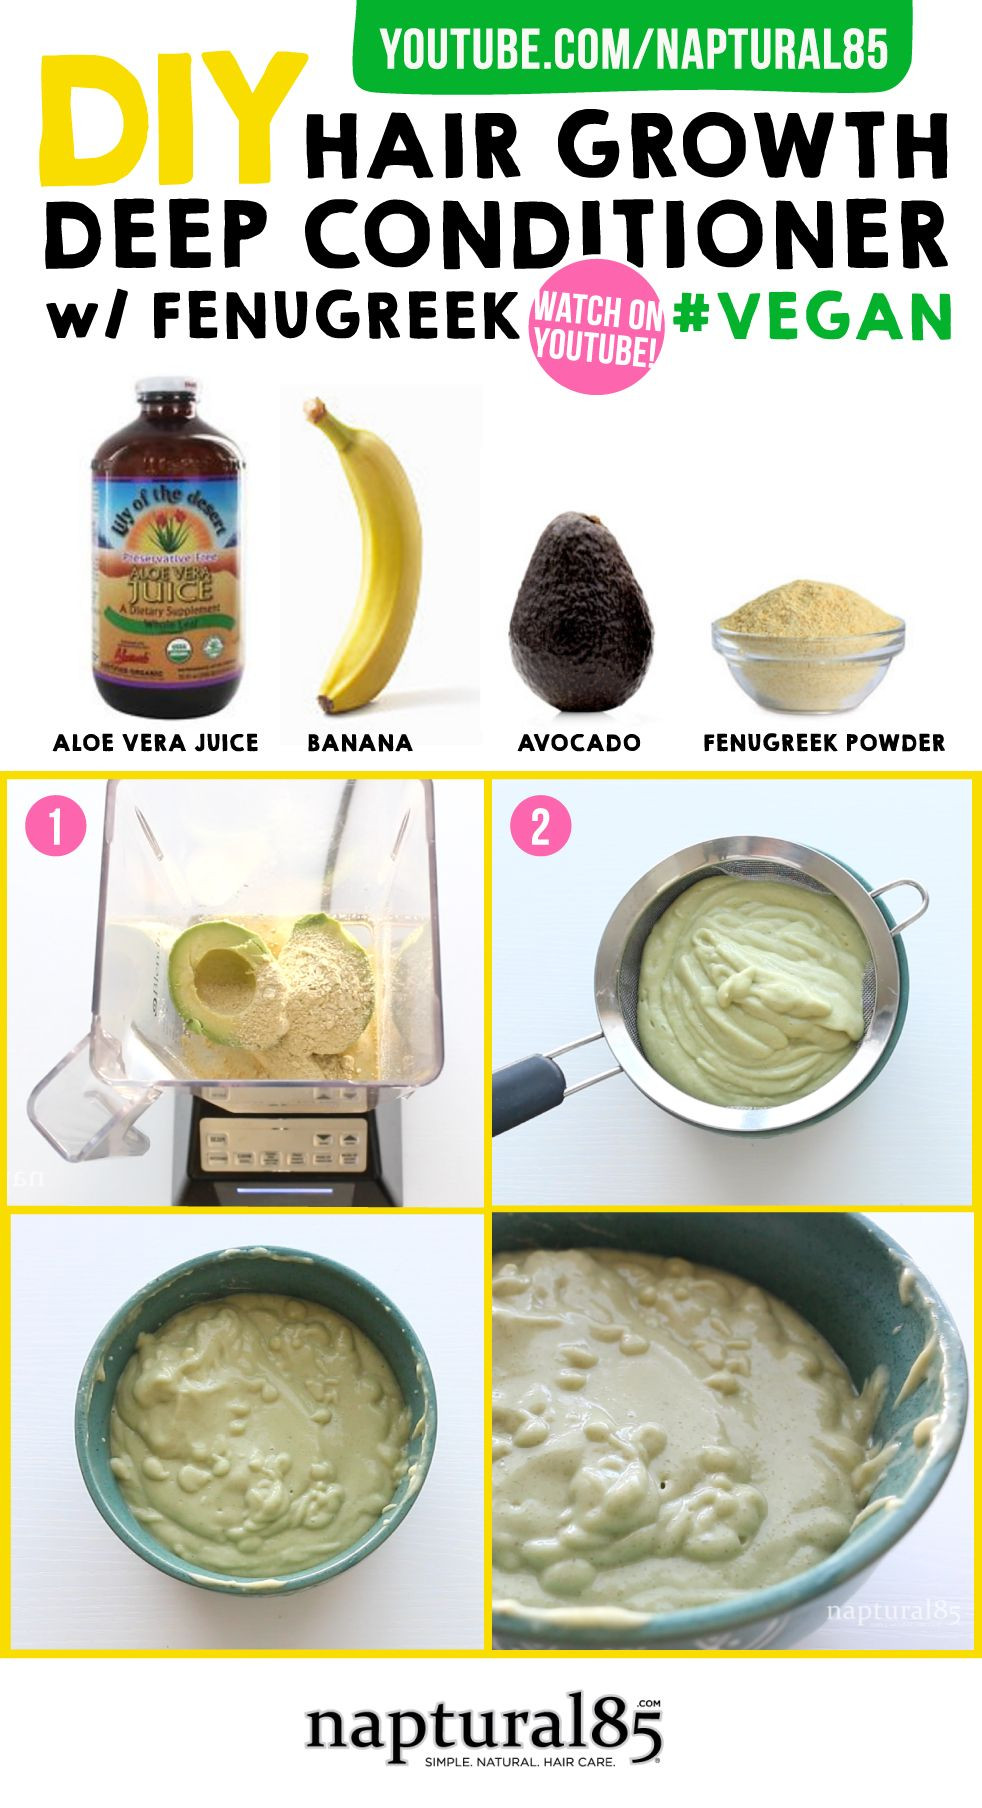 DIY Deep Conditioner For Hair Growth
 I ve been meaning to try a mask with banana and avocado in